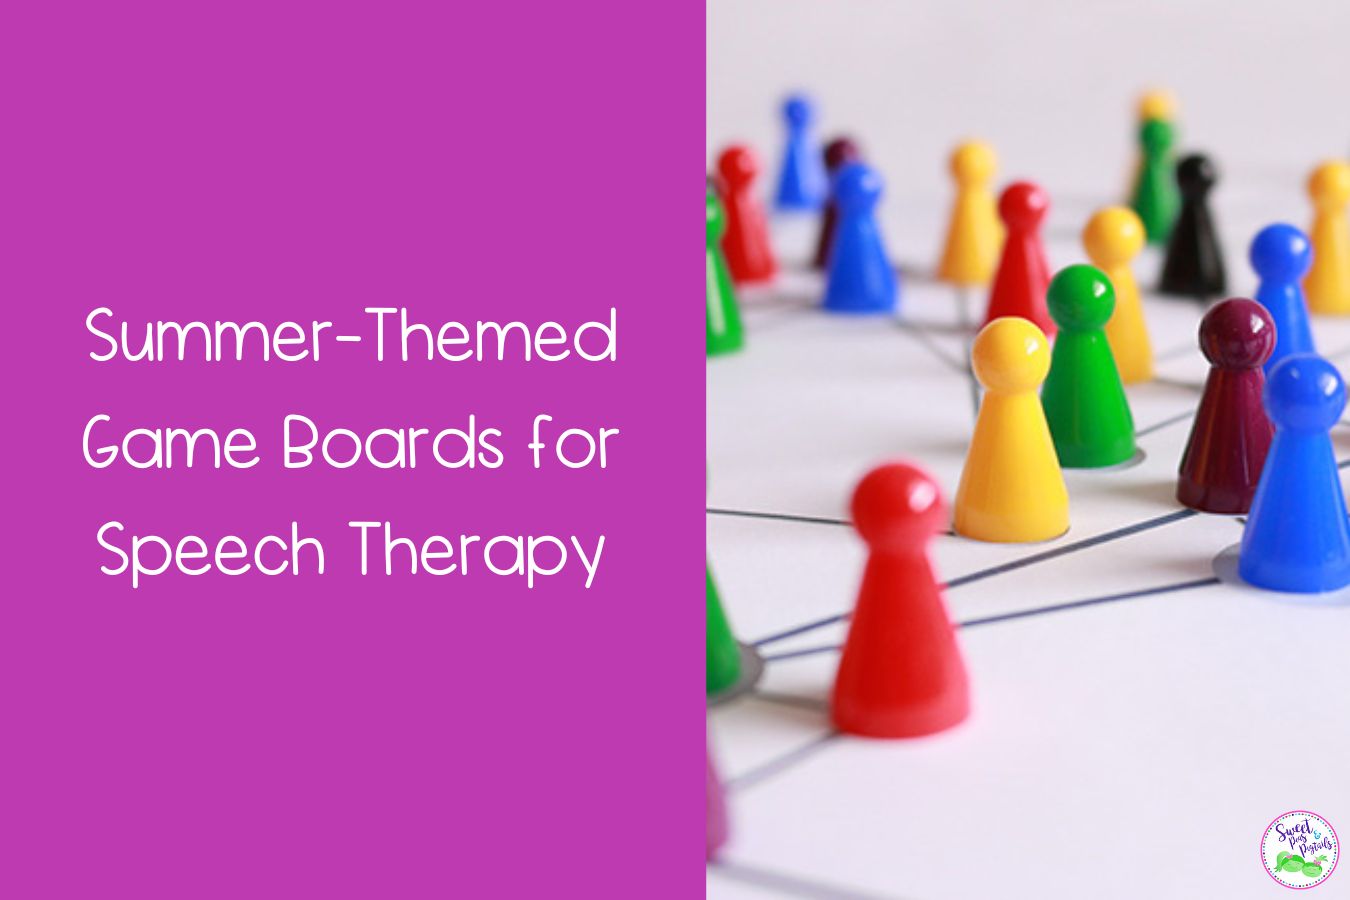 Summer-Themed Game Boards for Speech Therapy Featured